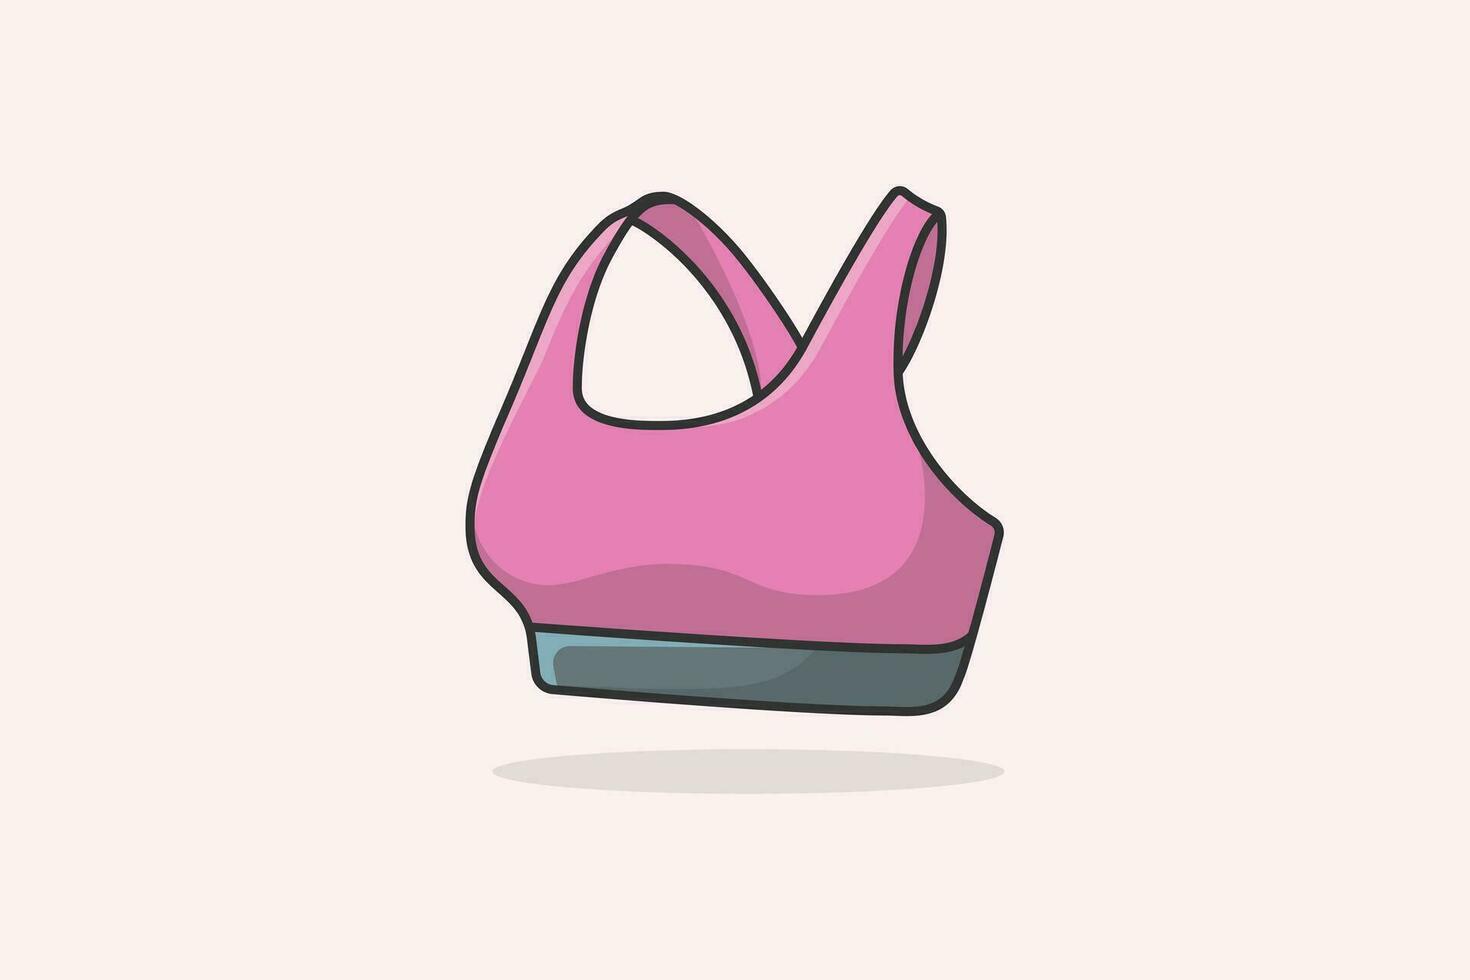 Girls Underwear Bra vector illustration. Sports and fashion objects icon concept. Sports and gym bra for women and girls Wear vector design with shadow.